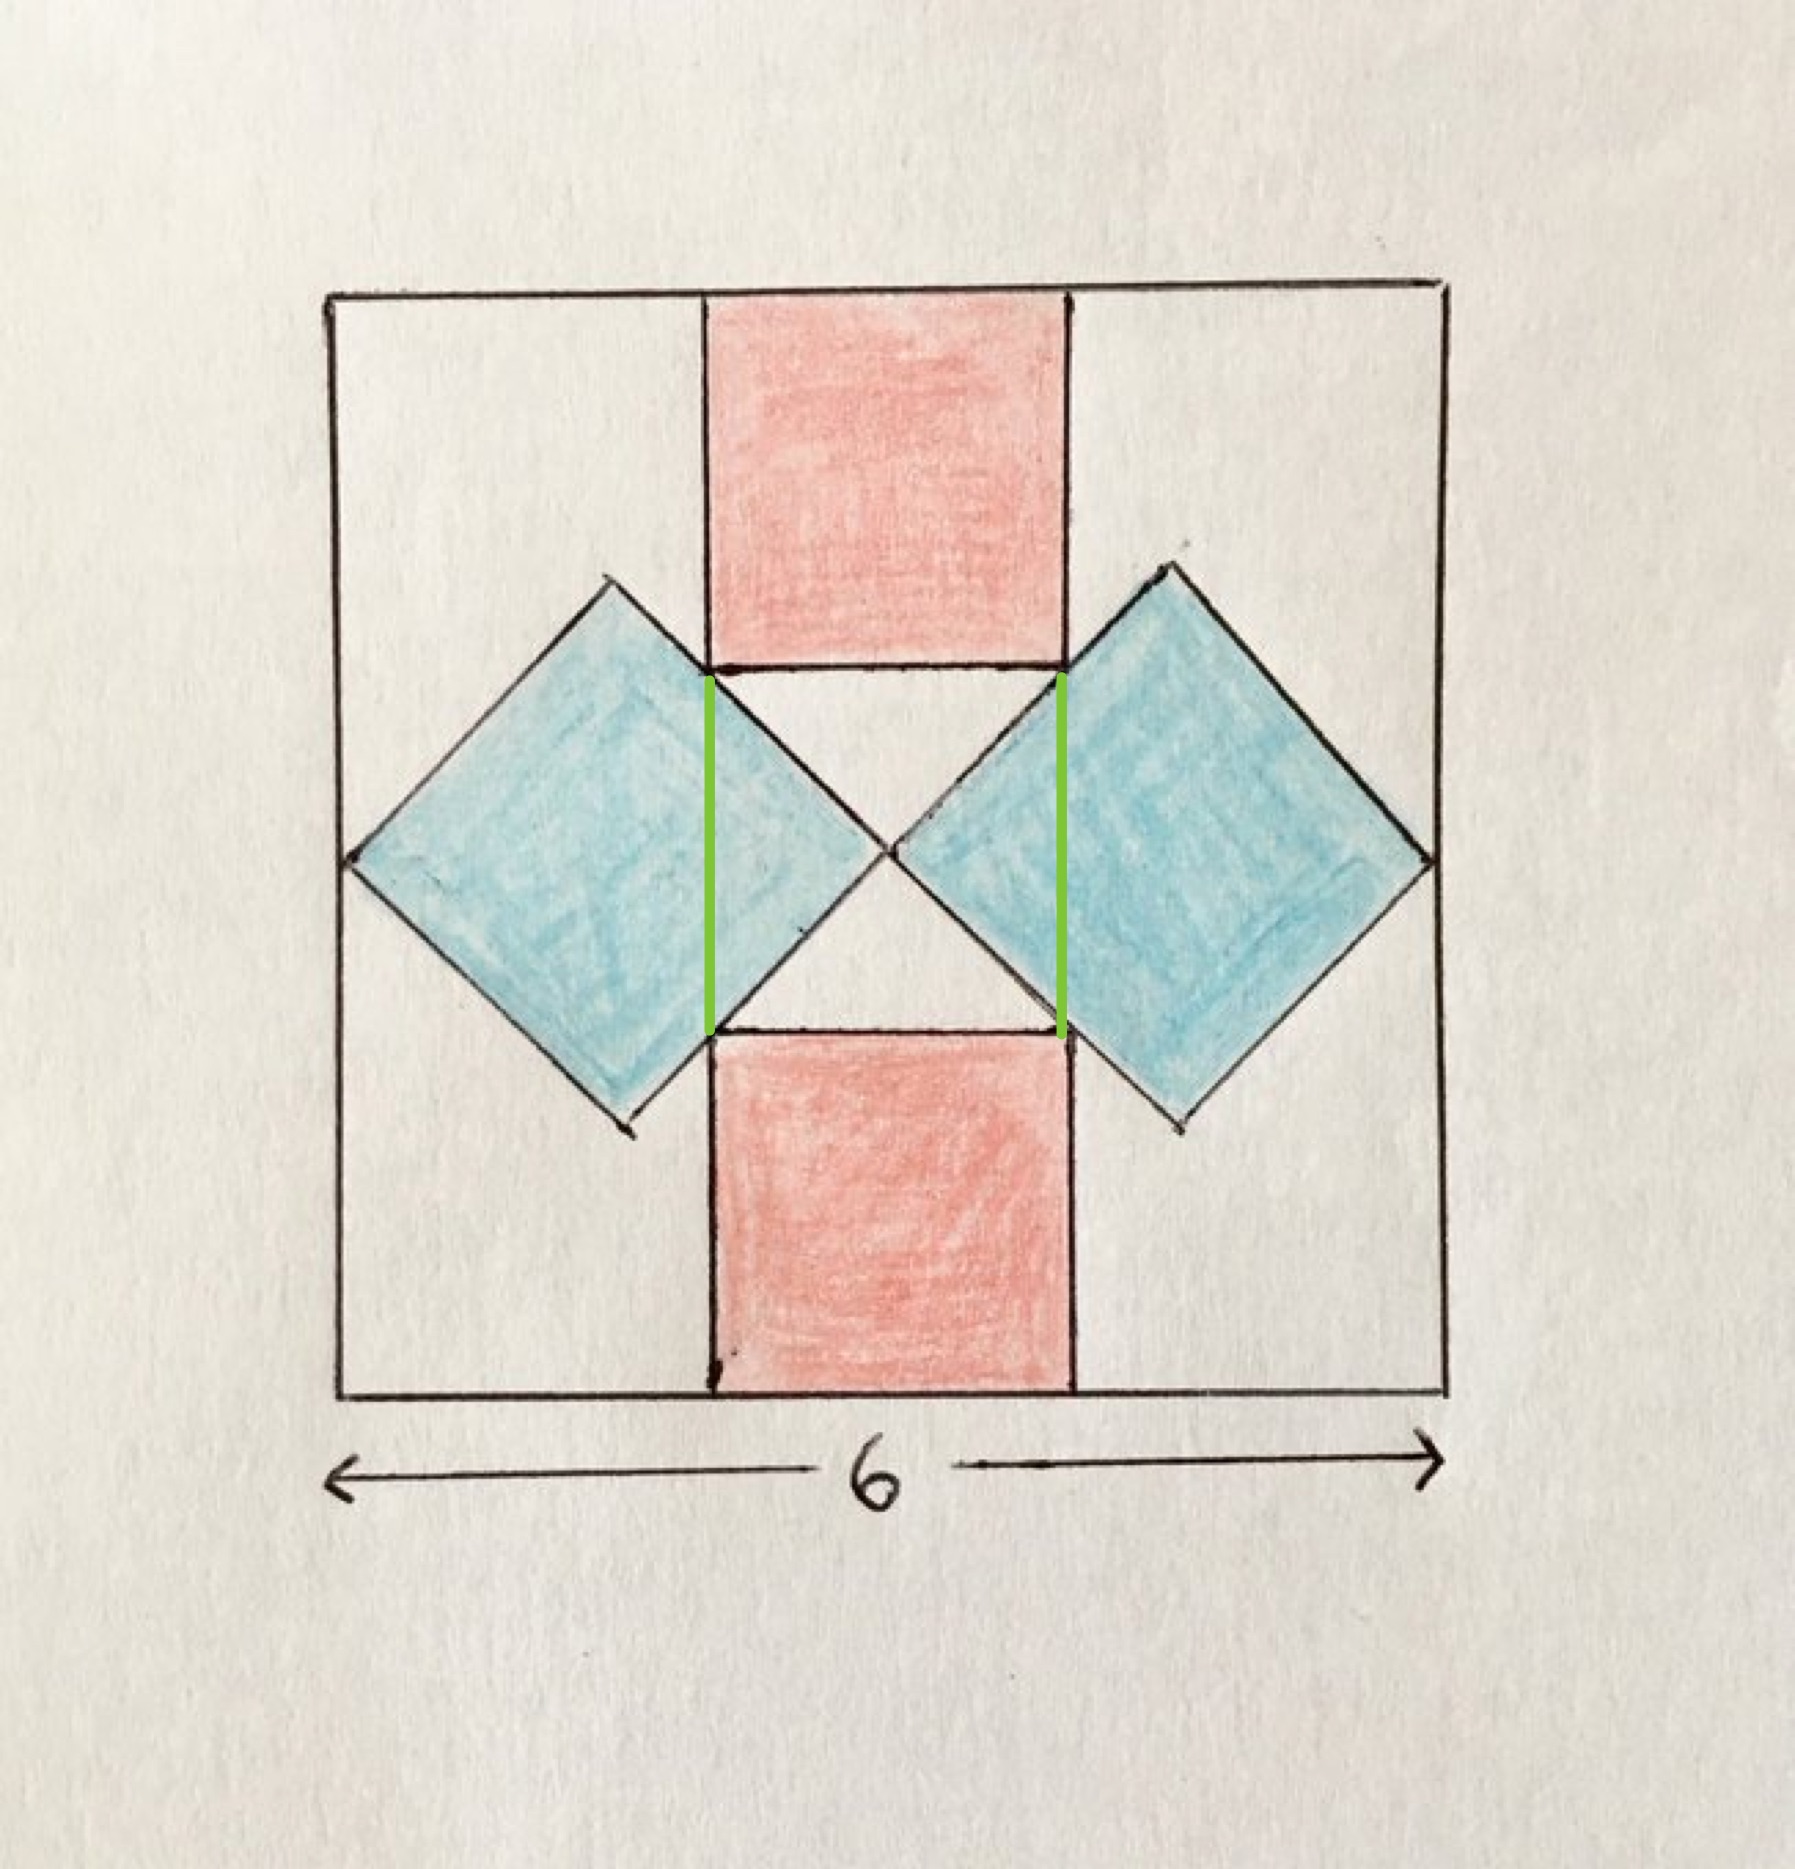 Four squares in a big square labelled